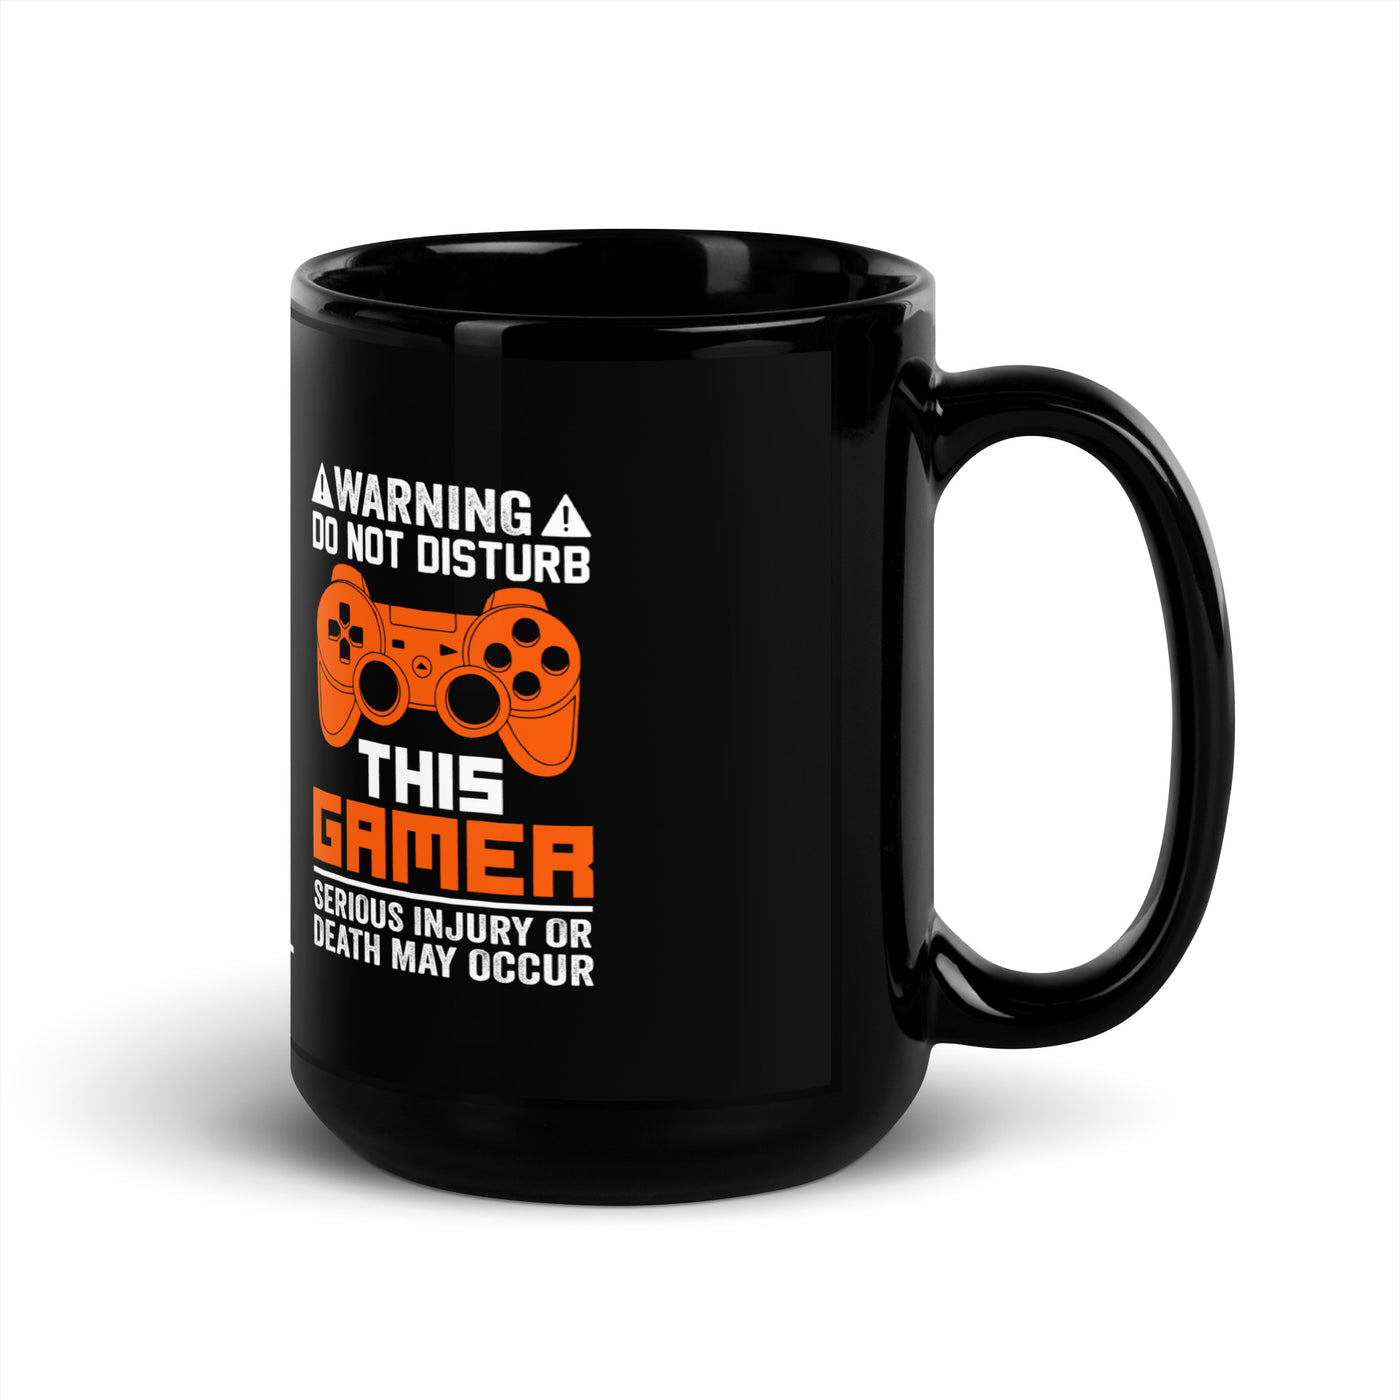 Warning: Do Not Disturb this Gamer! Serious Injury or Death may Occur - Black Glossy Mug